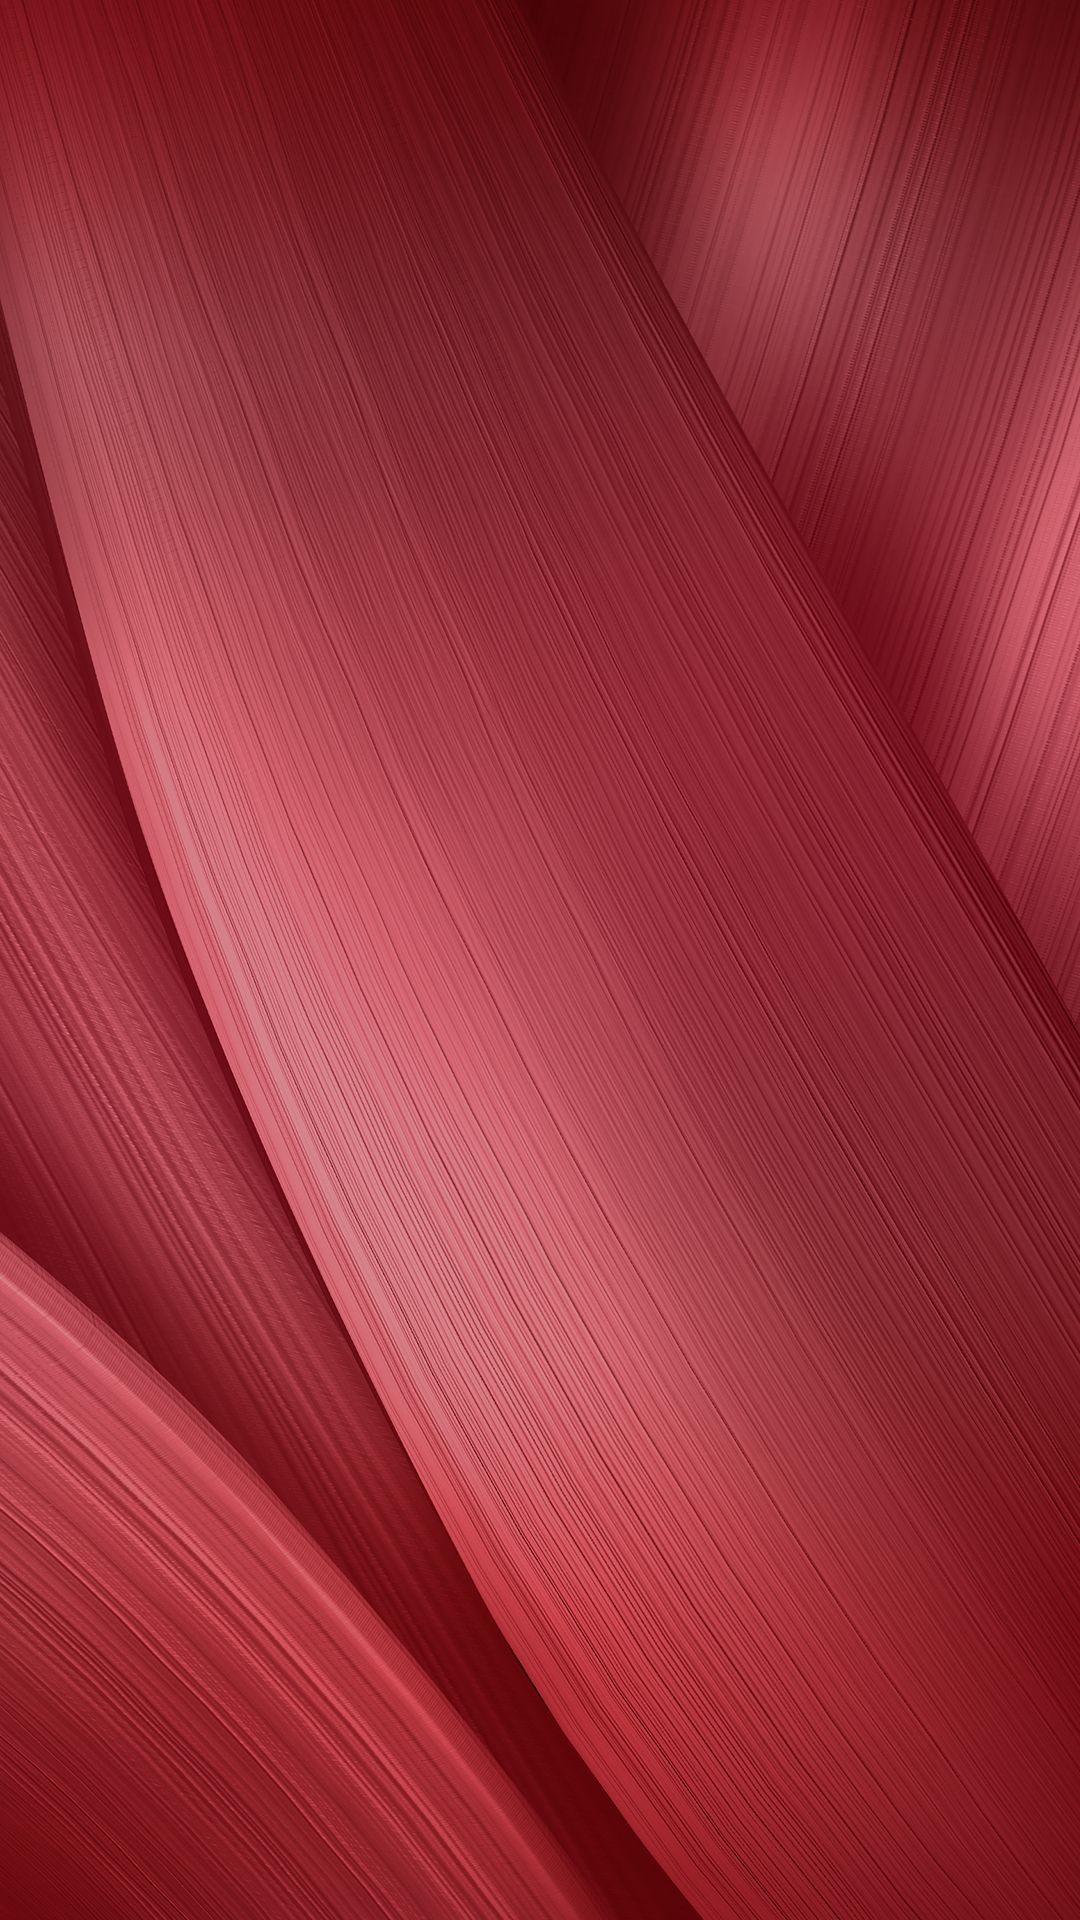 1080x1920 Pink Wallpaper, Mobile Wallpaper, Wallpaper Patterns, Iphone Wallpaper,  Wall Papers, Pilates, Iphone 7, Smartphone, Android